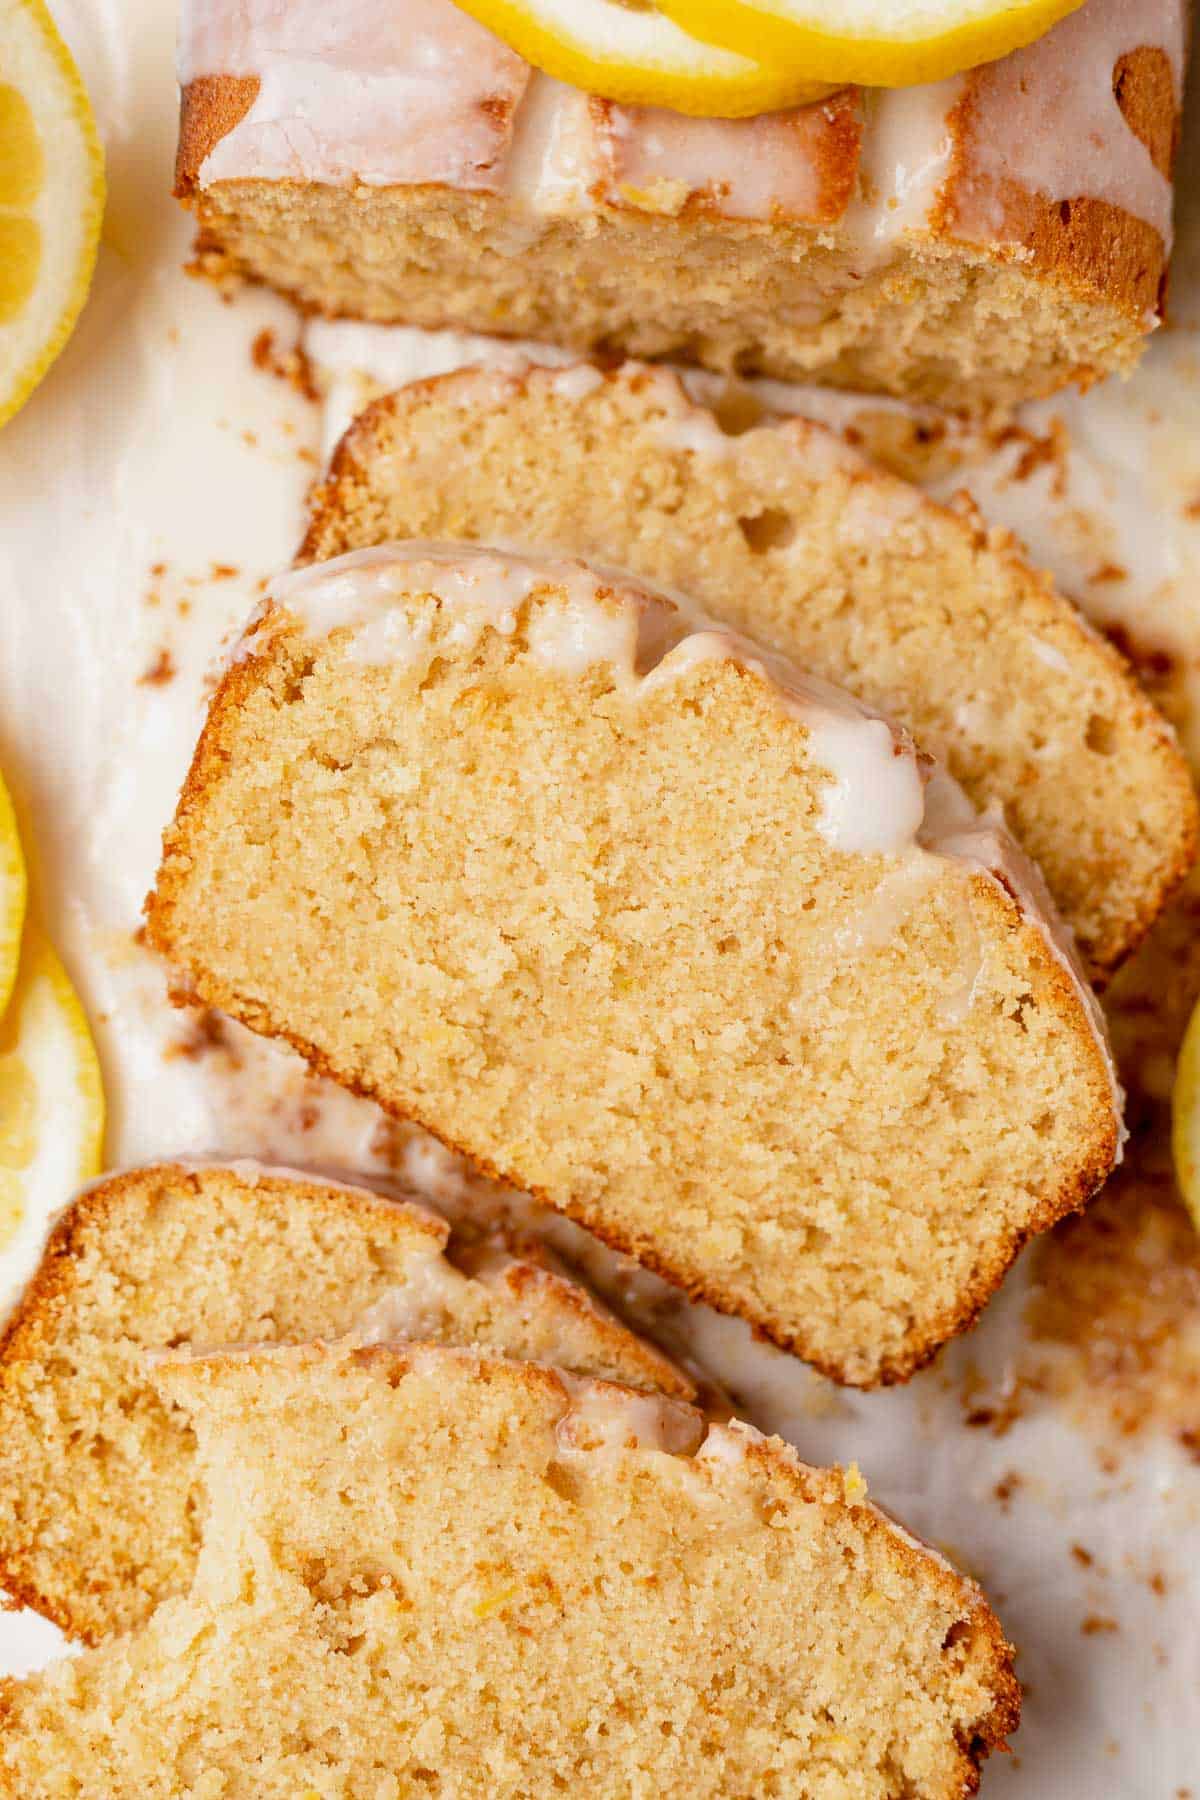 4 slices of gluten-free lemon drizzle cake on parchment paper